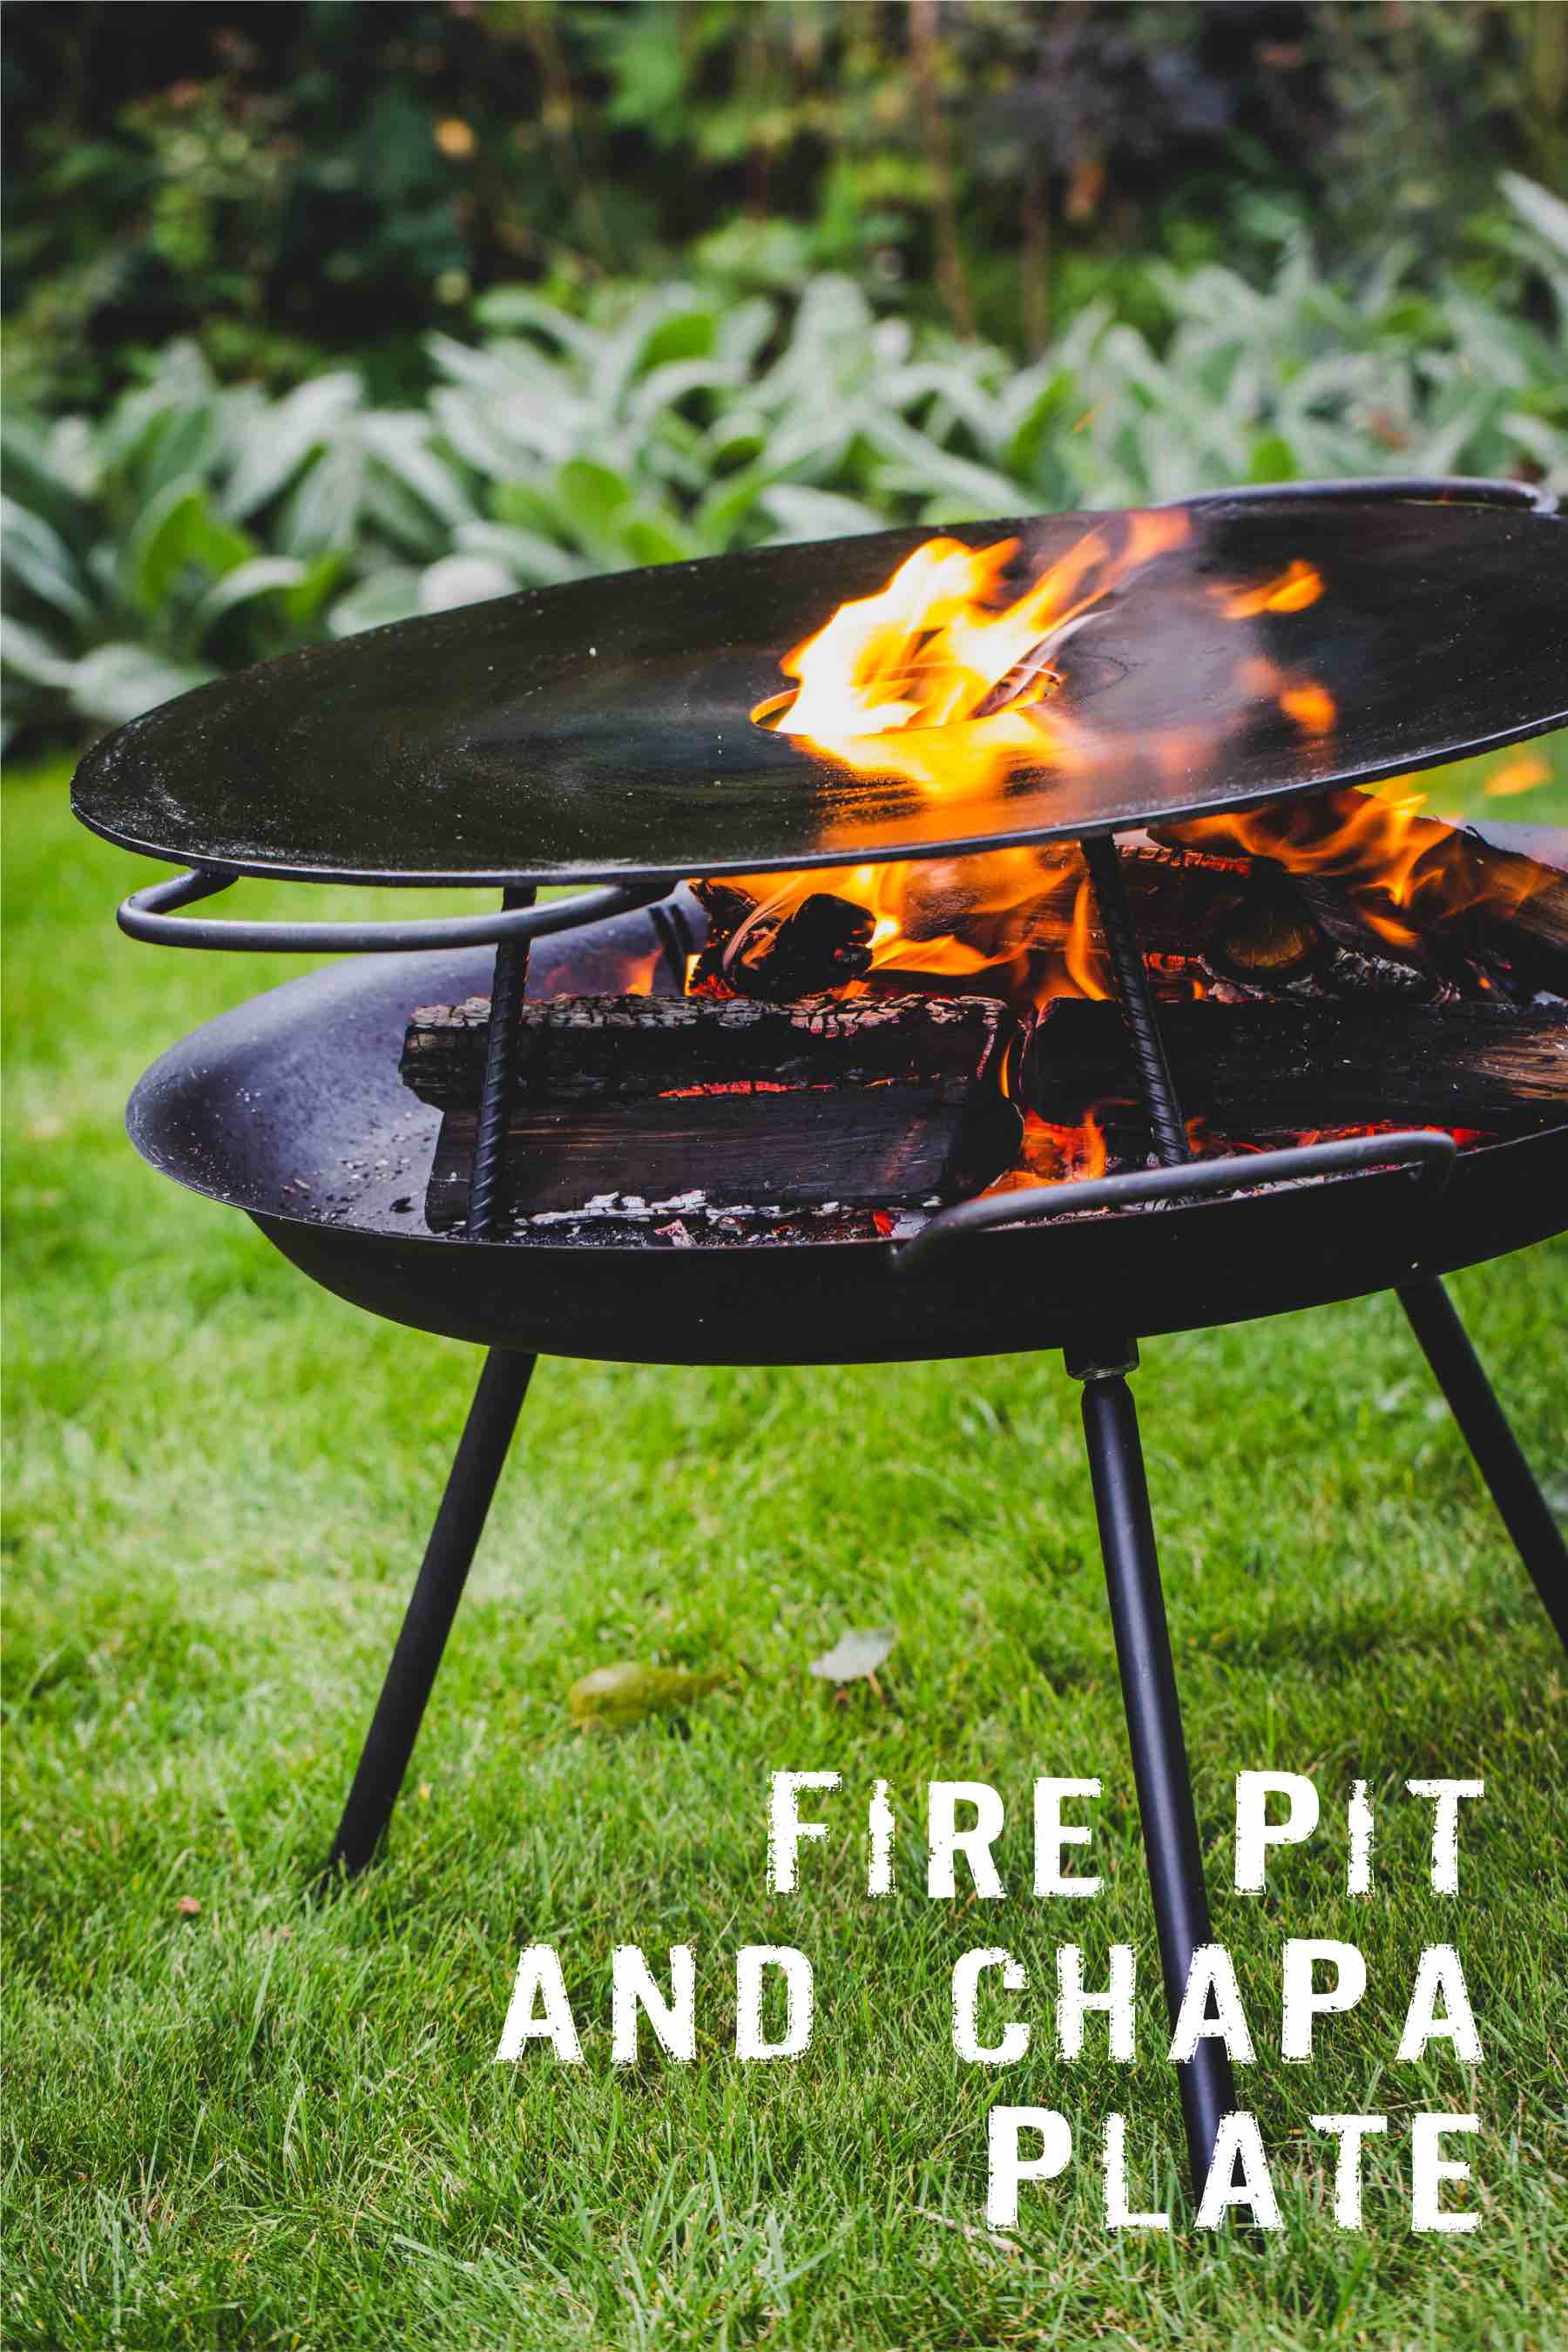 vargas-brothers-fire-pit-with-chapa-hot-plate